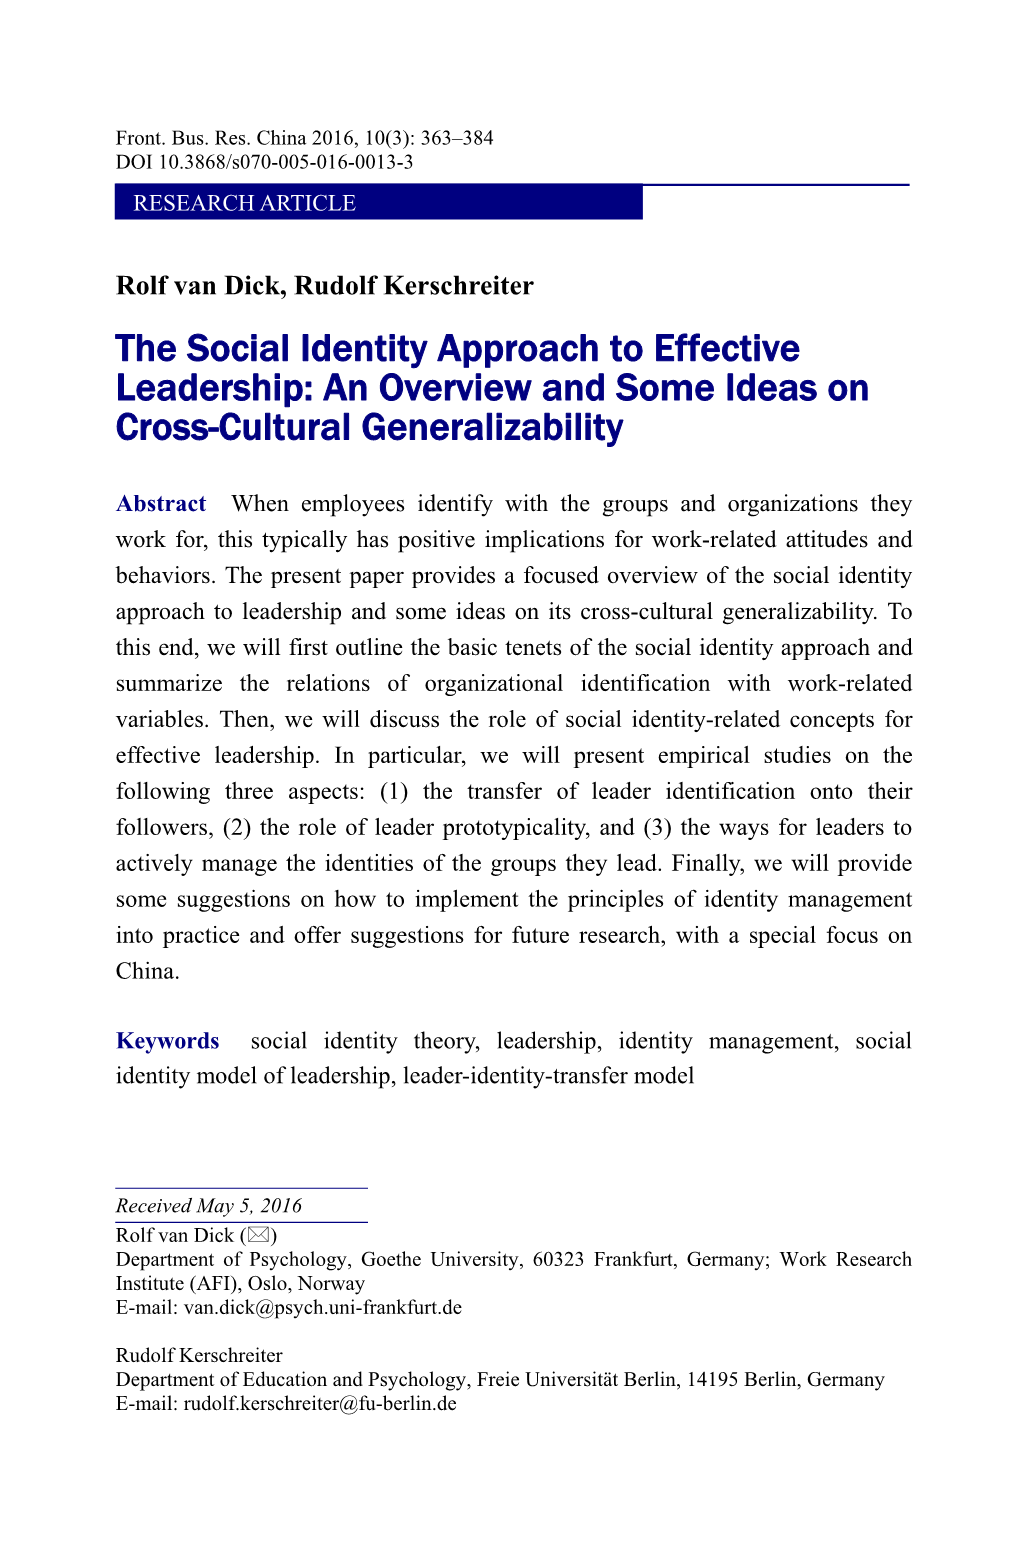 The Social Identity Approach to Effective Leadership: an Overview and Some Ideas on Cross-Cultural Generalizability